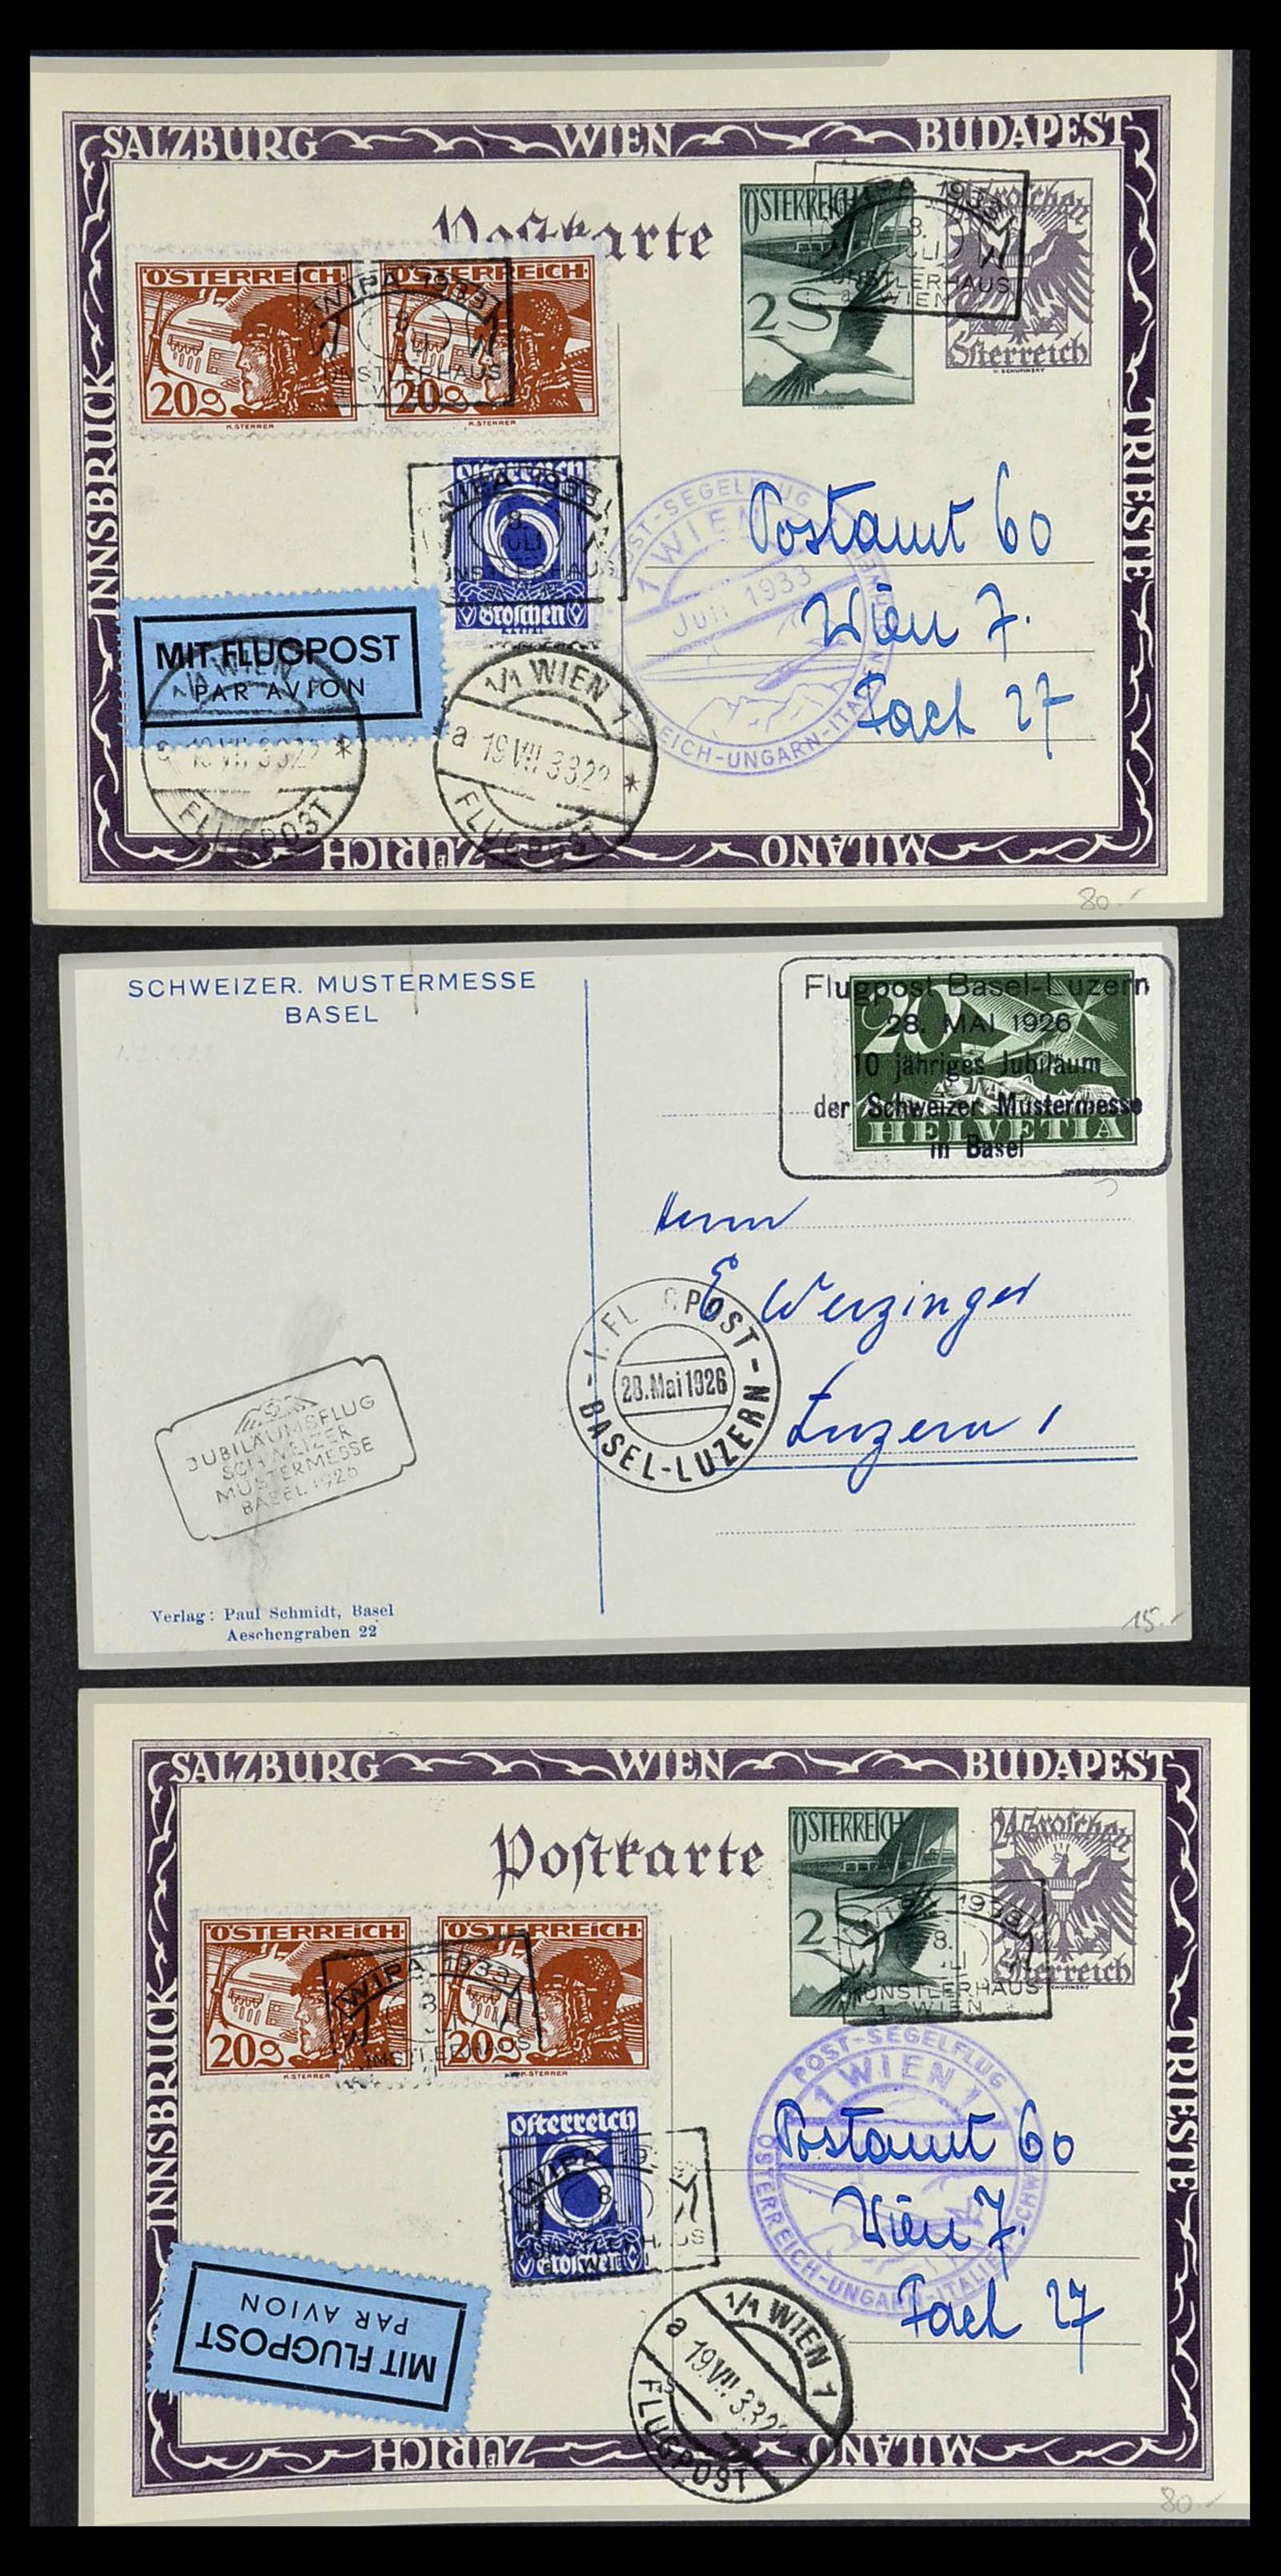 34141 072 - Stamp collection 34141 Switzerland airmail covers 1920-1960.